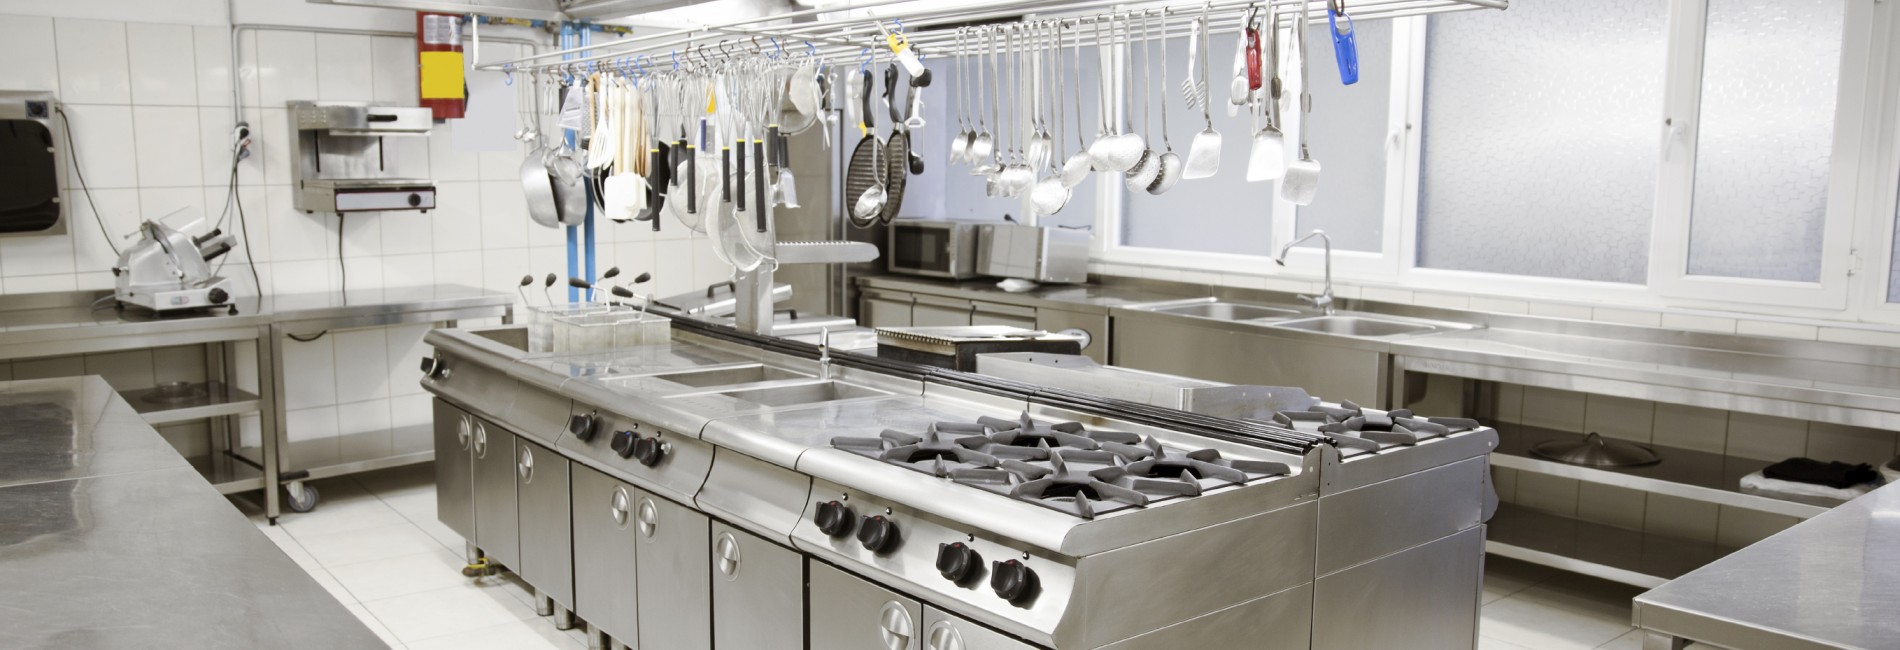 Kitchen Restaurant Equipment Leading Hospitality Procurement And Hotel Supplies Company